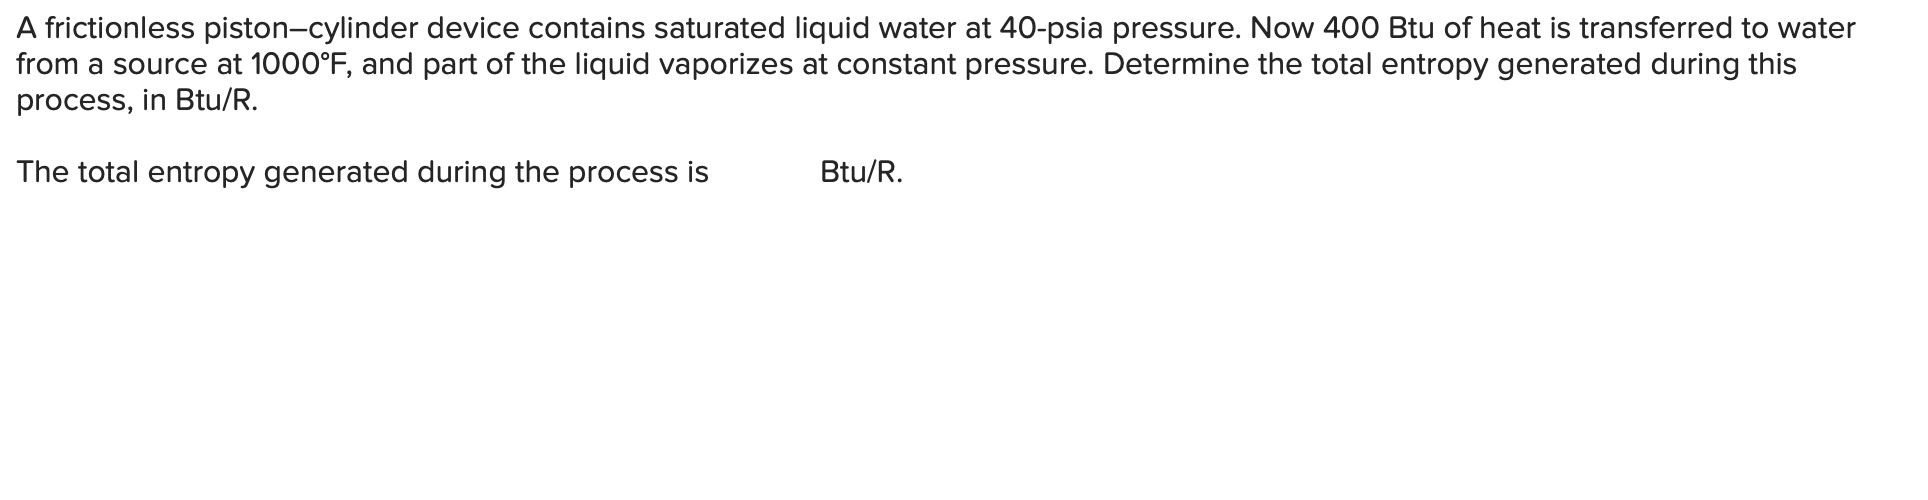 A frictionless piston-cylinder device contains saturated liquid water at 40-psia pressure. Now 400 Btu of heat is transferred to water
from a source at 1000°F, and part of the liquid vaporizes at constant pressure. Determine the total entropy generated during this
process, in Btu/R.
Btu/R
The total entropy generated during the process is
